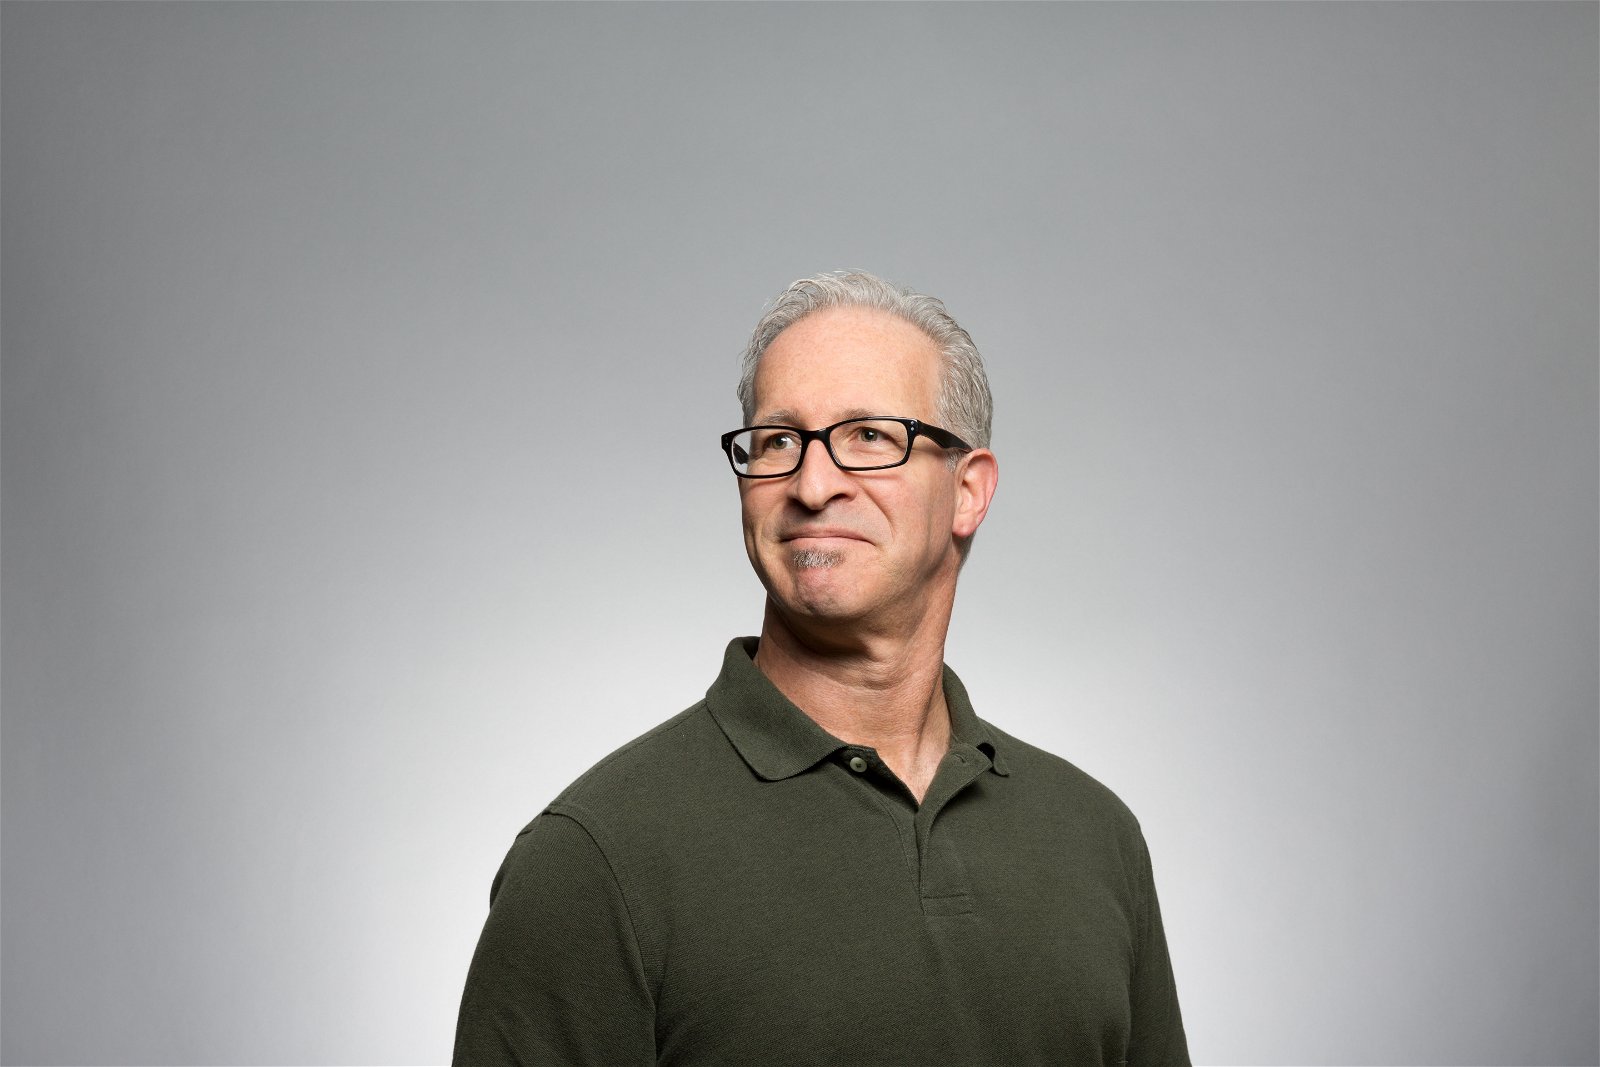 A man with glasses and a green polo shirt looking off to the side for a headshot studio pose